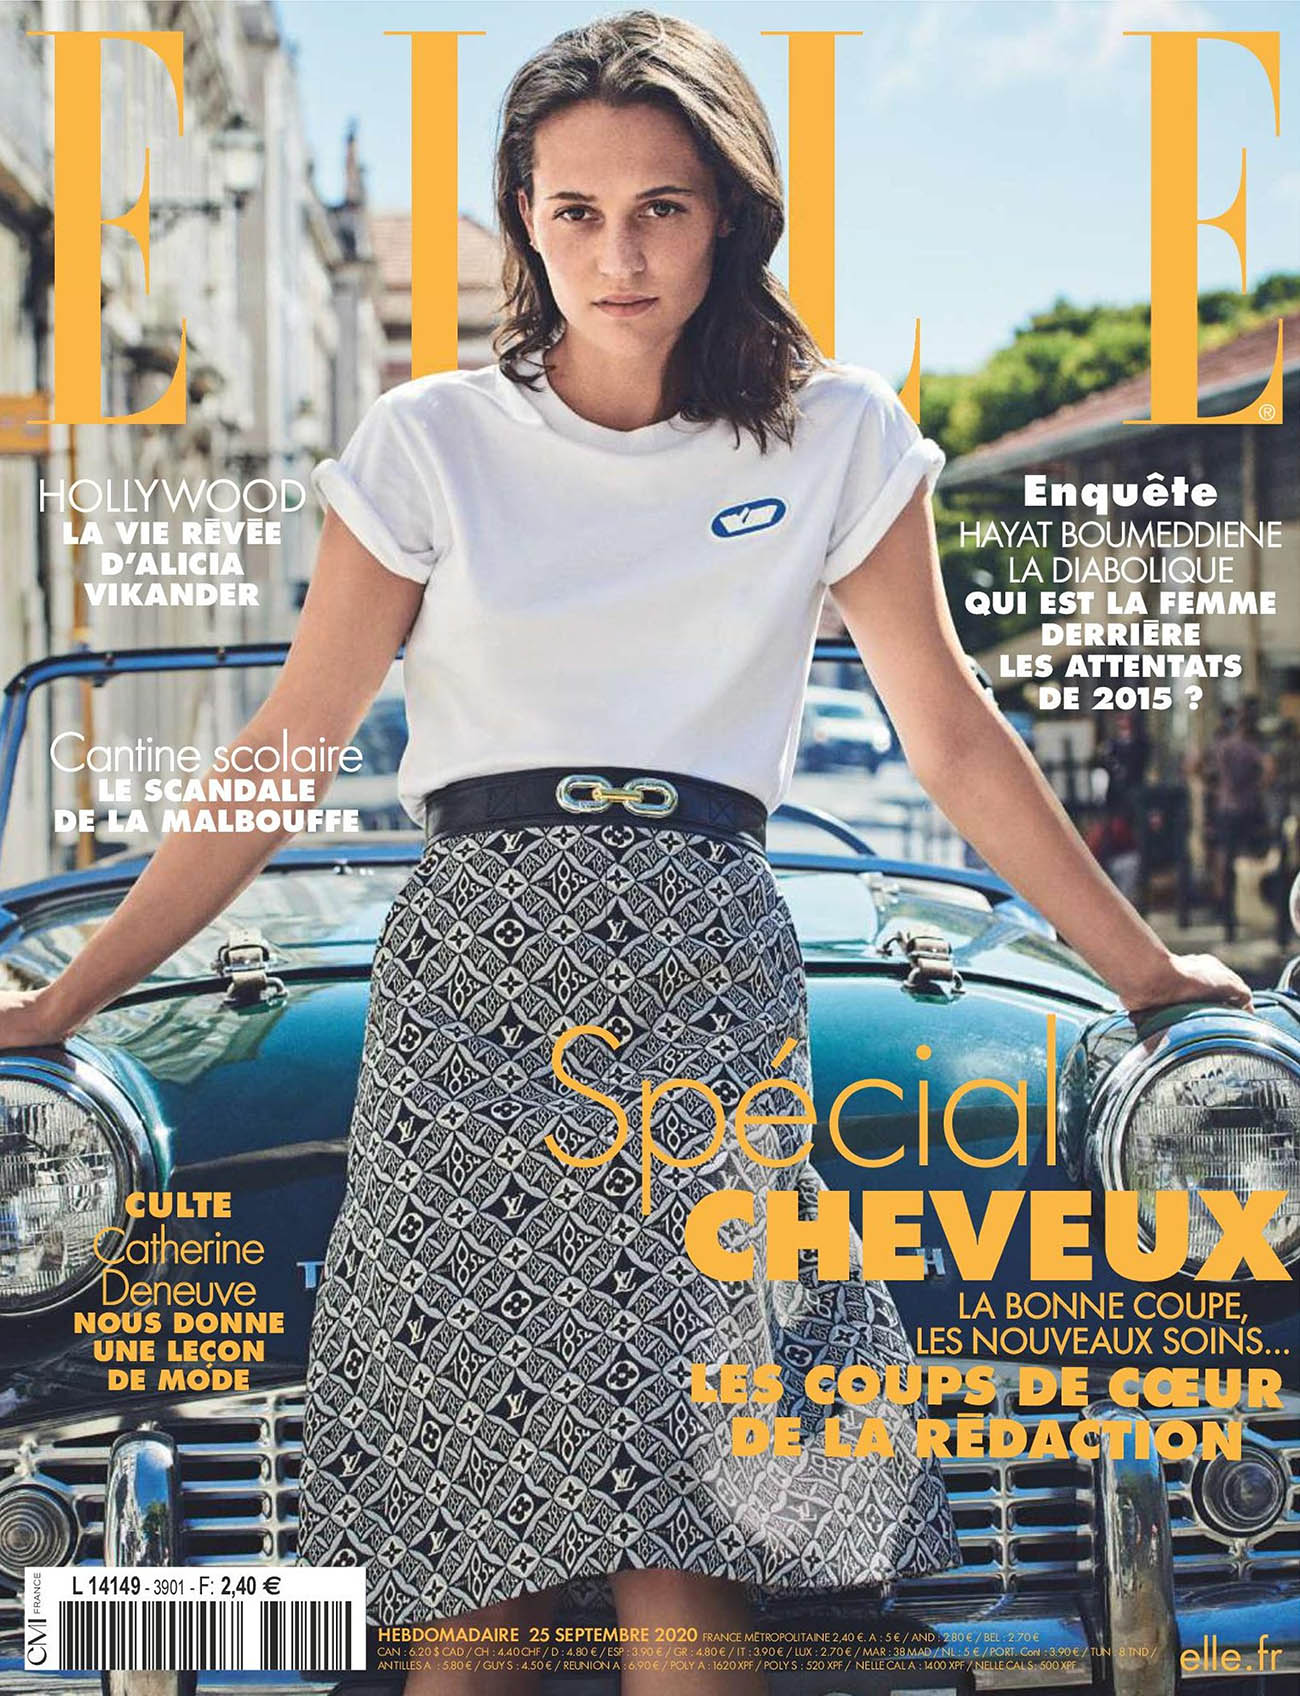 Alicia Vikander covers Elle France September 25th, 2020 by Matthew Brookes  - fashionotography